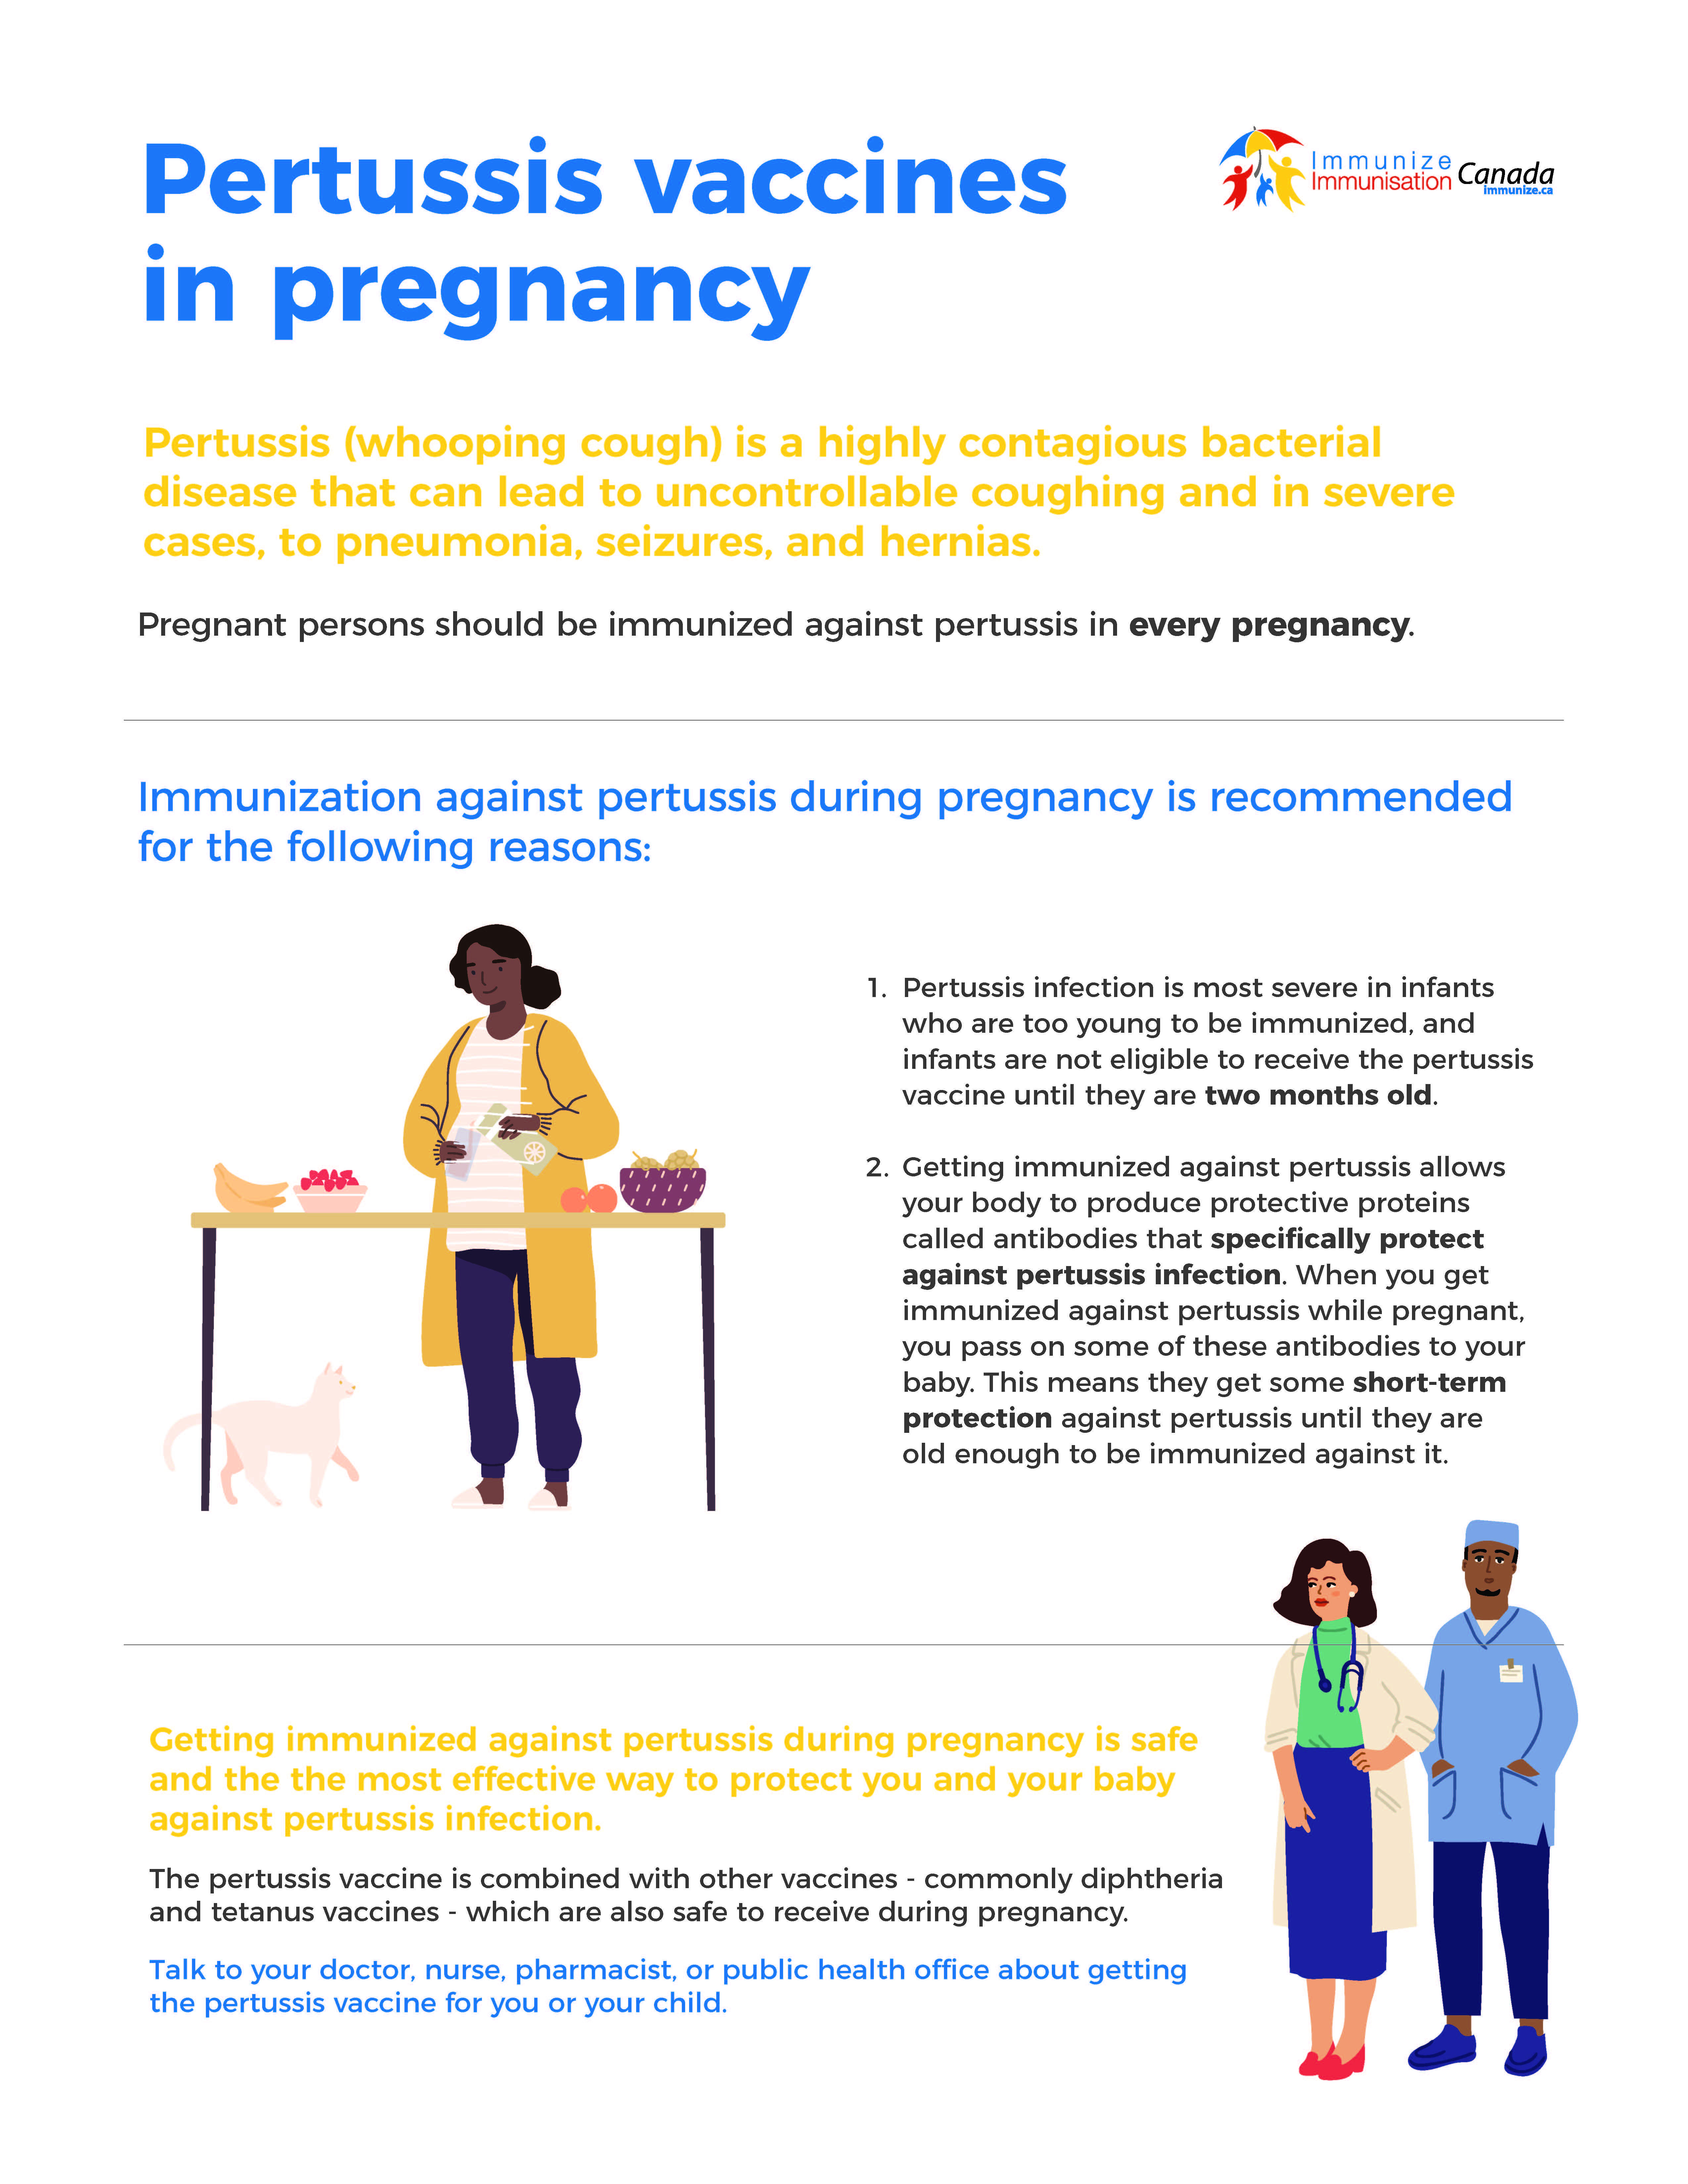 Pertussis (whooping cough) vaccines in pregnancy